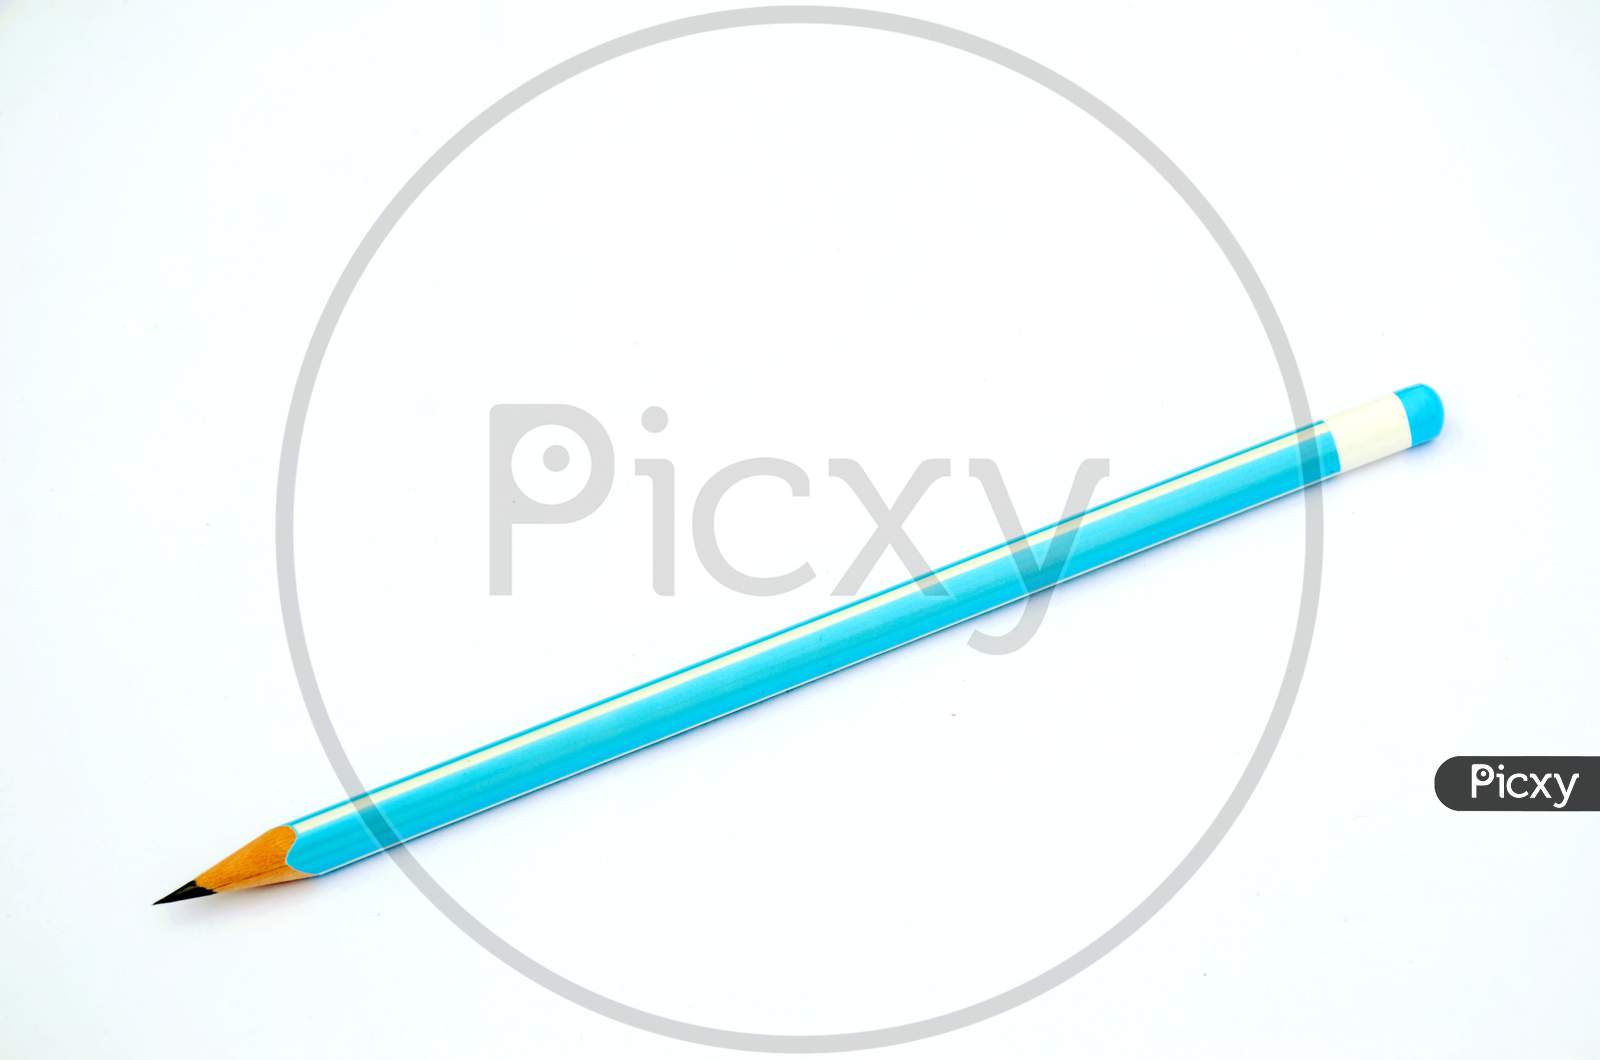 the sky blue wooden pencil isolated on white background.